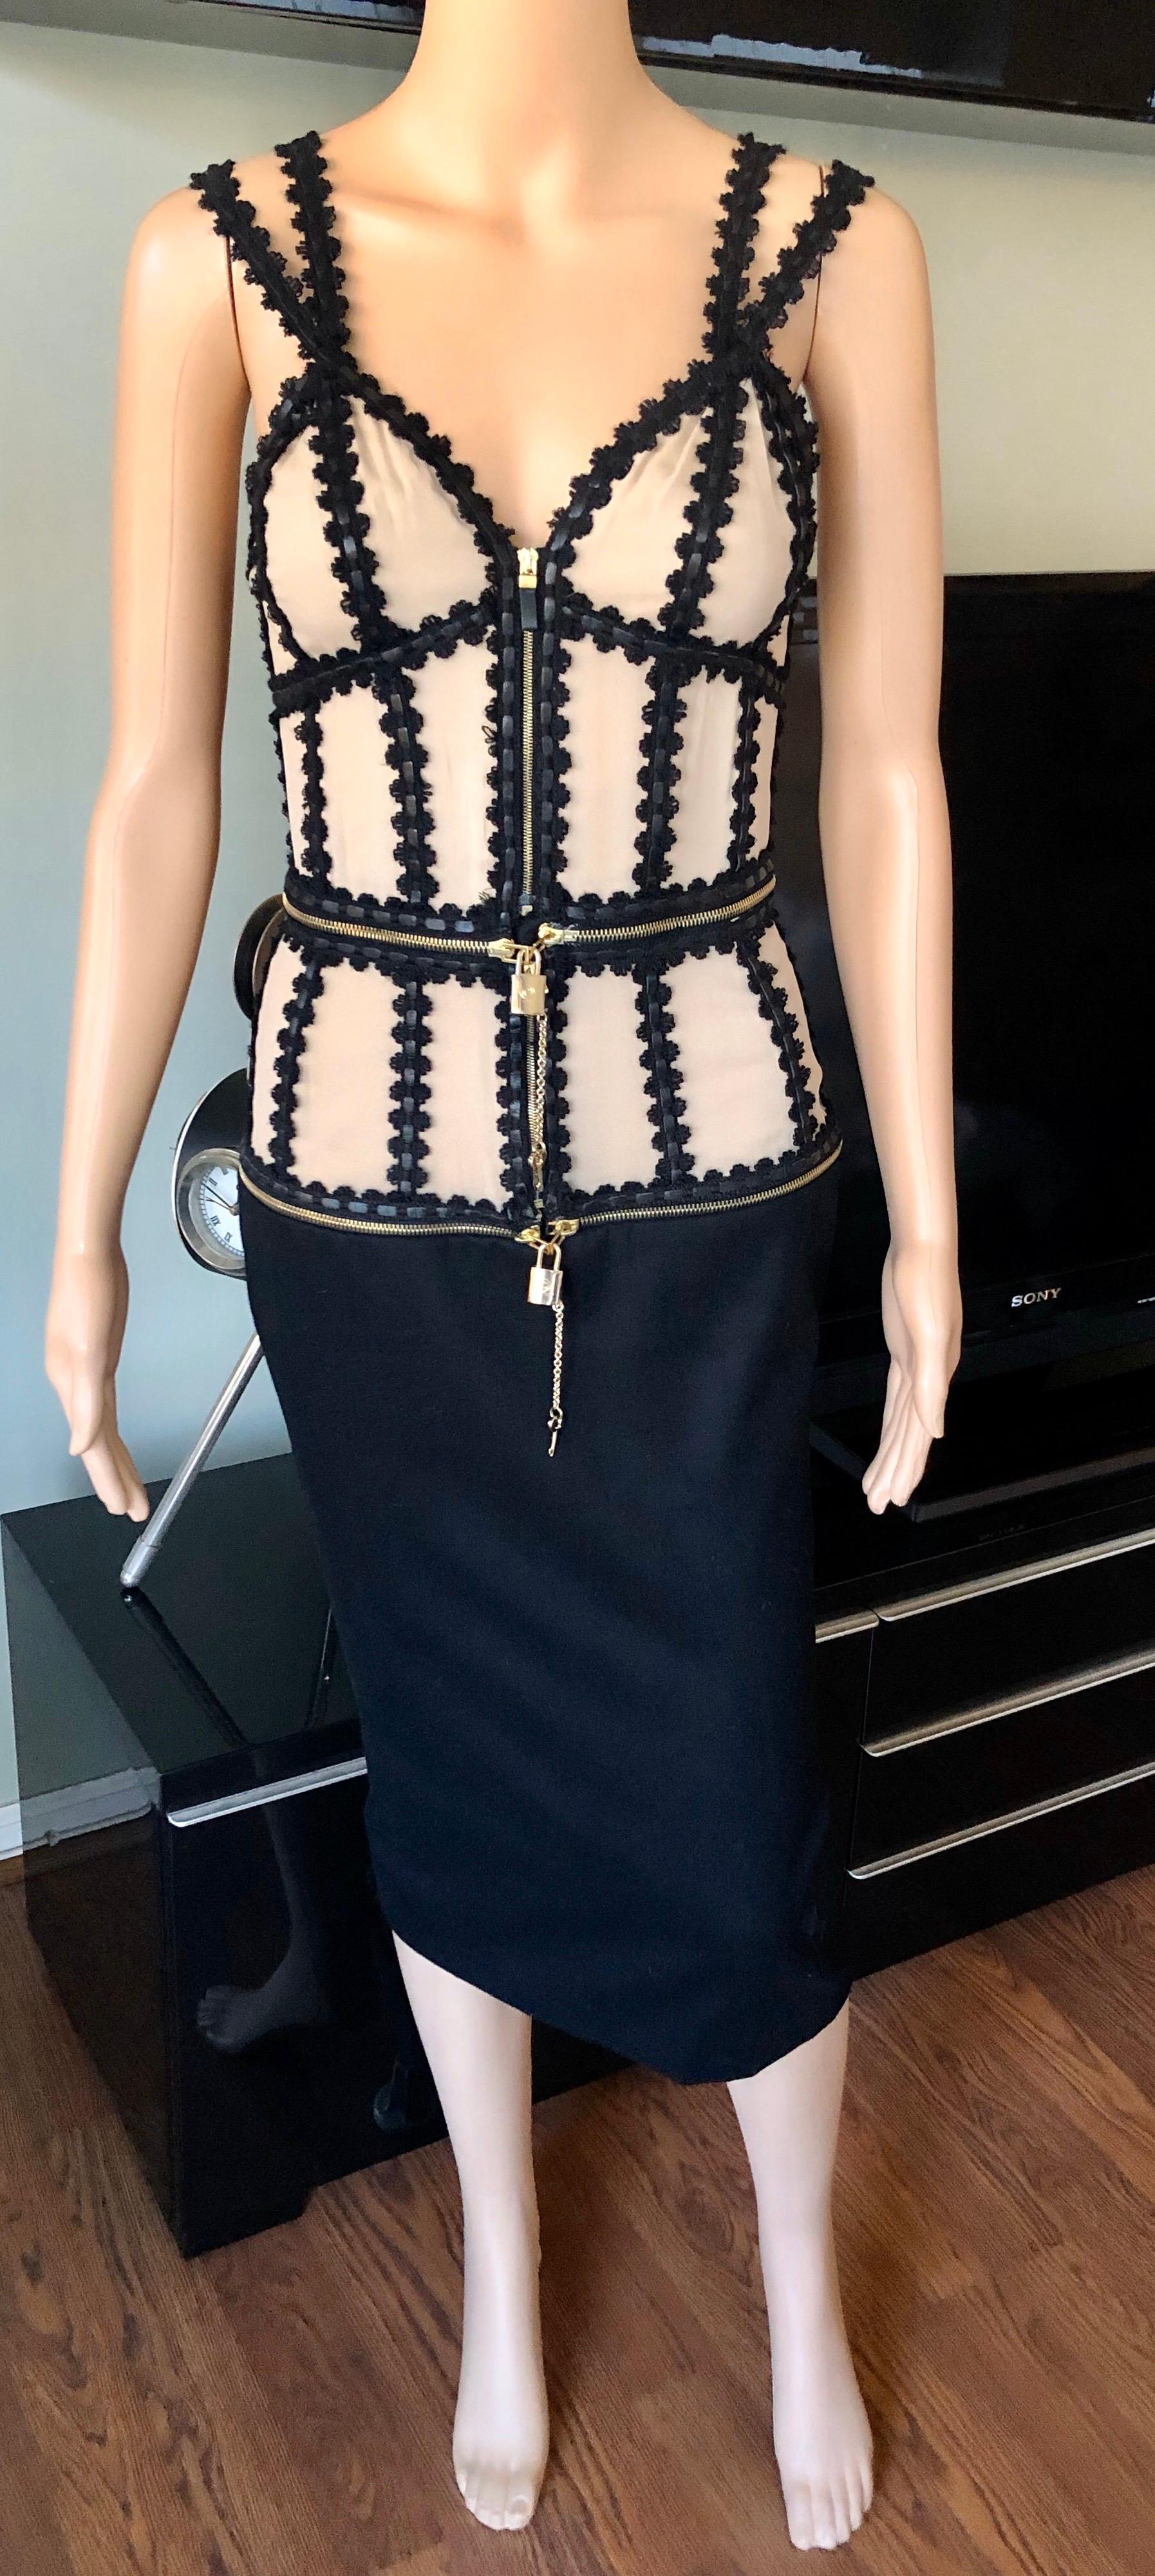 Alexander McQueen Vintage c.2003 Zipper Lock And Key Dress IT 40

Alexander McQueen black and tan dress with plunging neckline, lace trim, logo lock and key embellishments at bodice and zip closure at front.